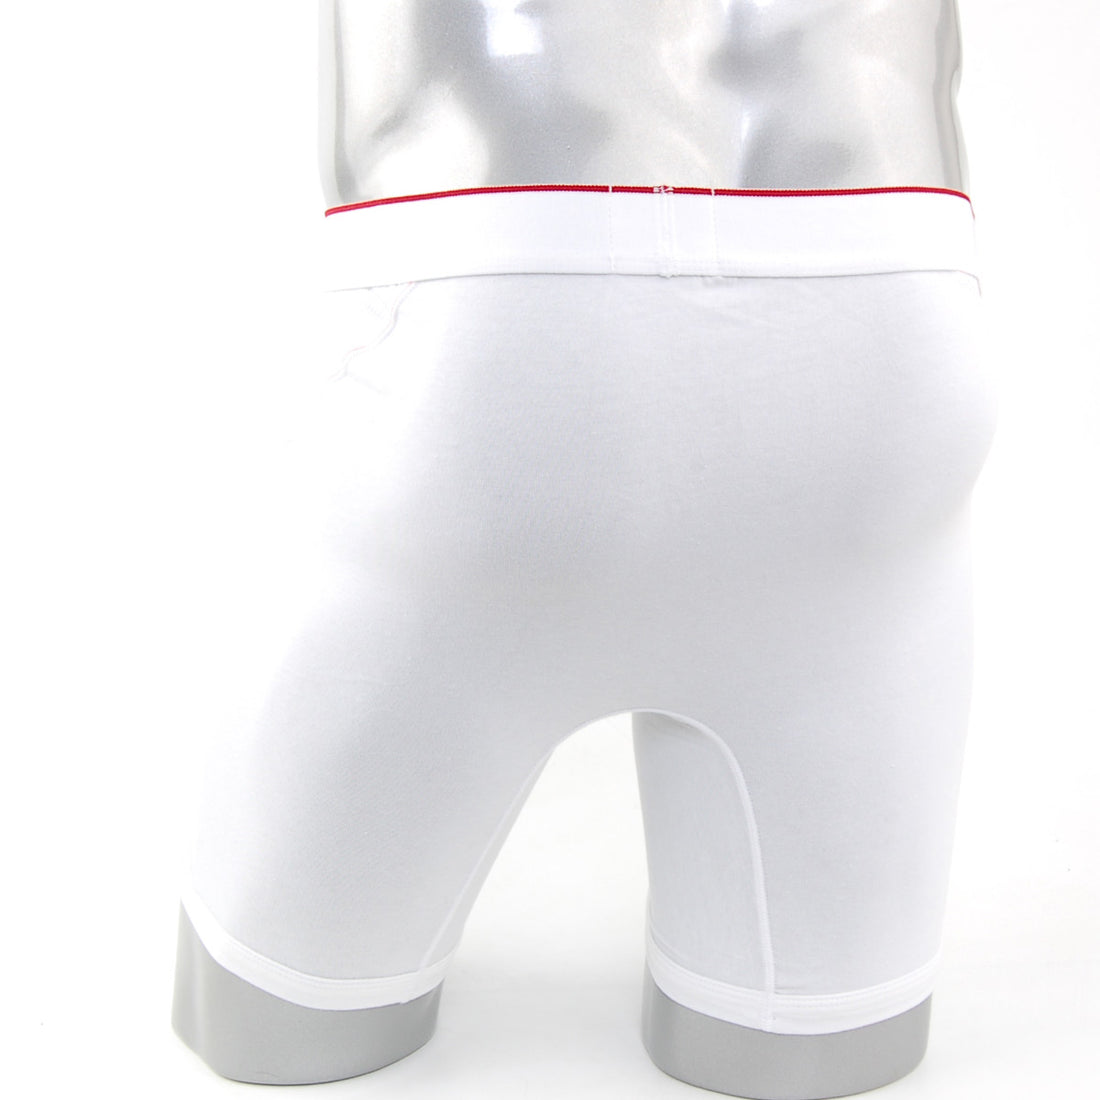 [DKNY] Sport Compression Cycle Short White (57564)